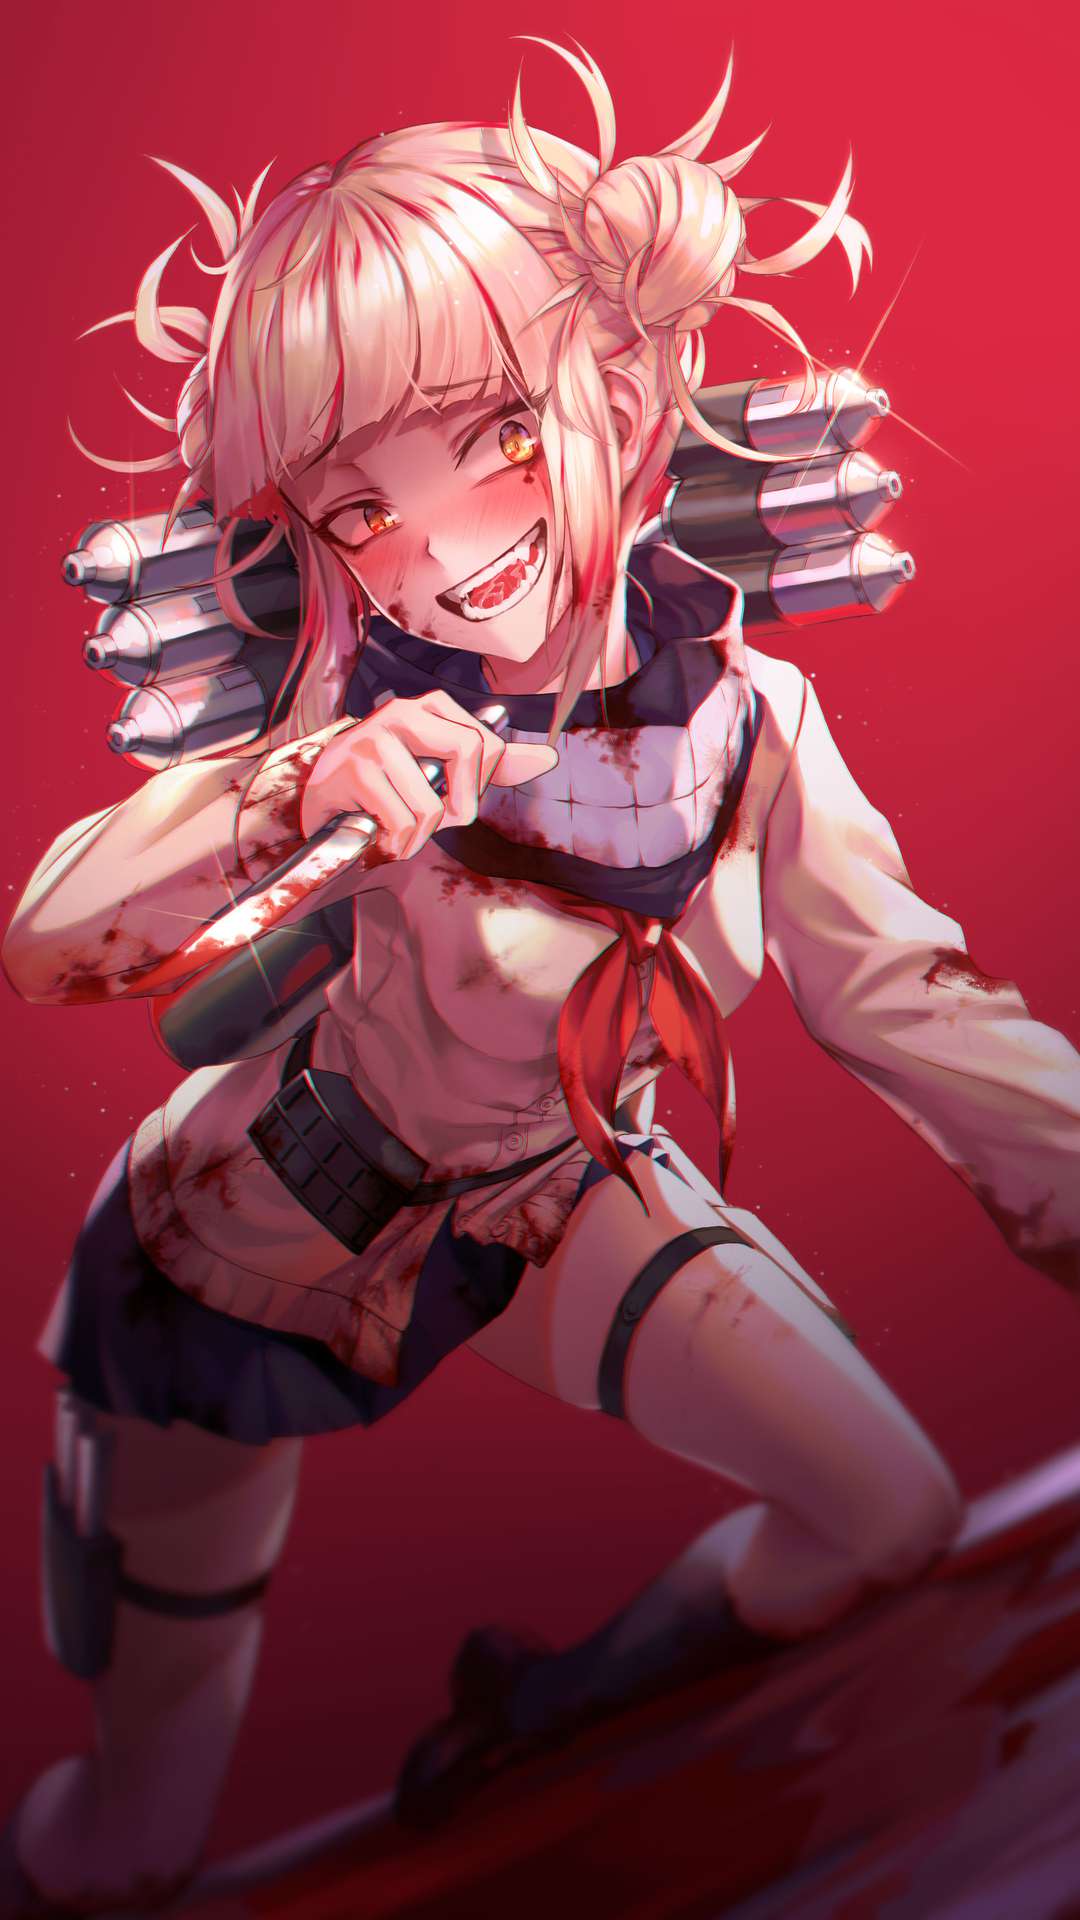 Himiko Toga Art Wallpaper HD Anime 4K Wallpapers Images and Background   Wallpapers Den